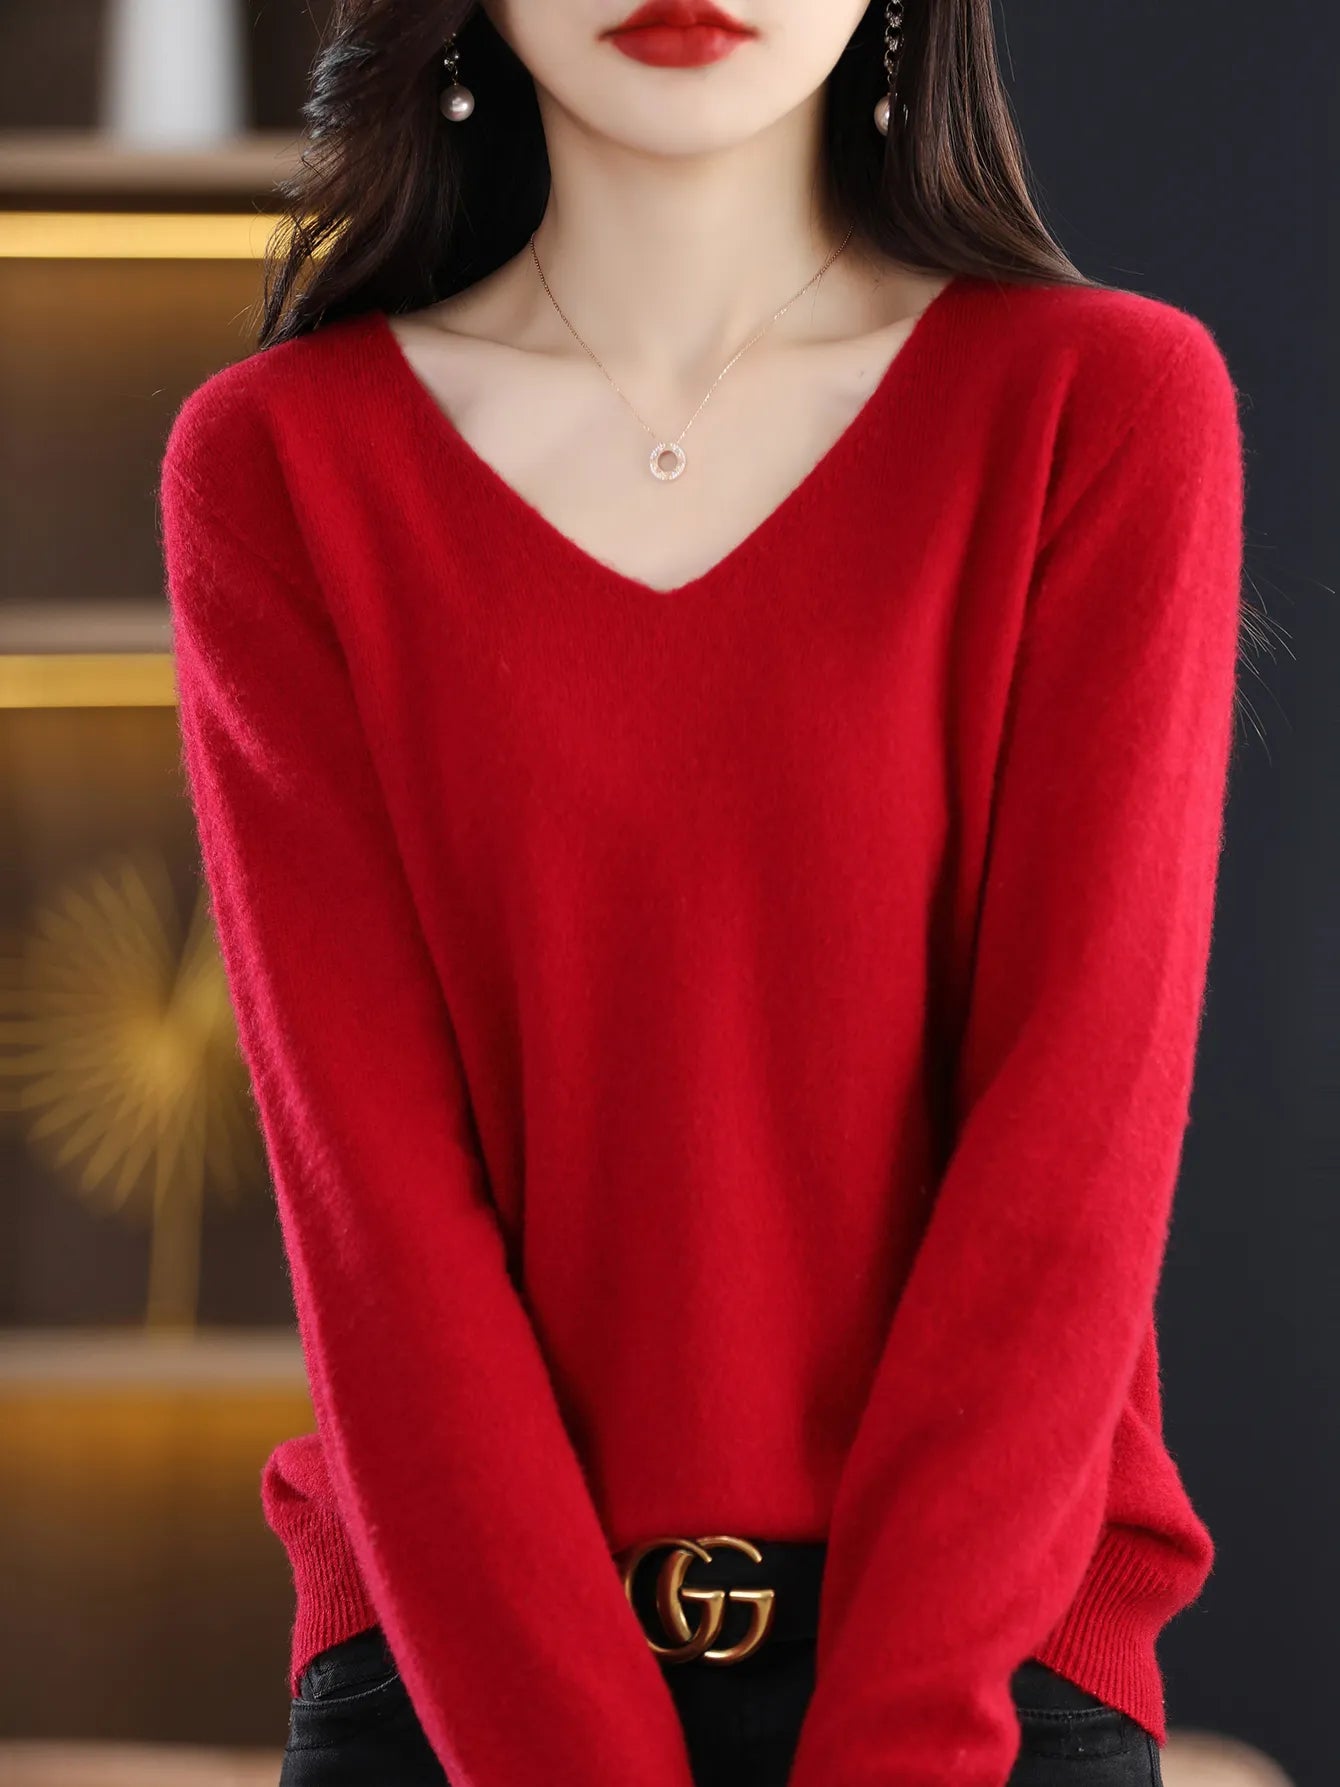 Sweater for Women 100% Merino Wool V Neck Sweater Fall Winter Basic Warm Pullovers Long Sleeve Knit Jumpers Female Clothing